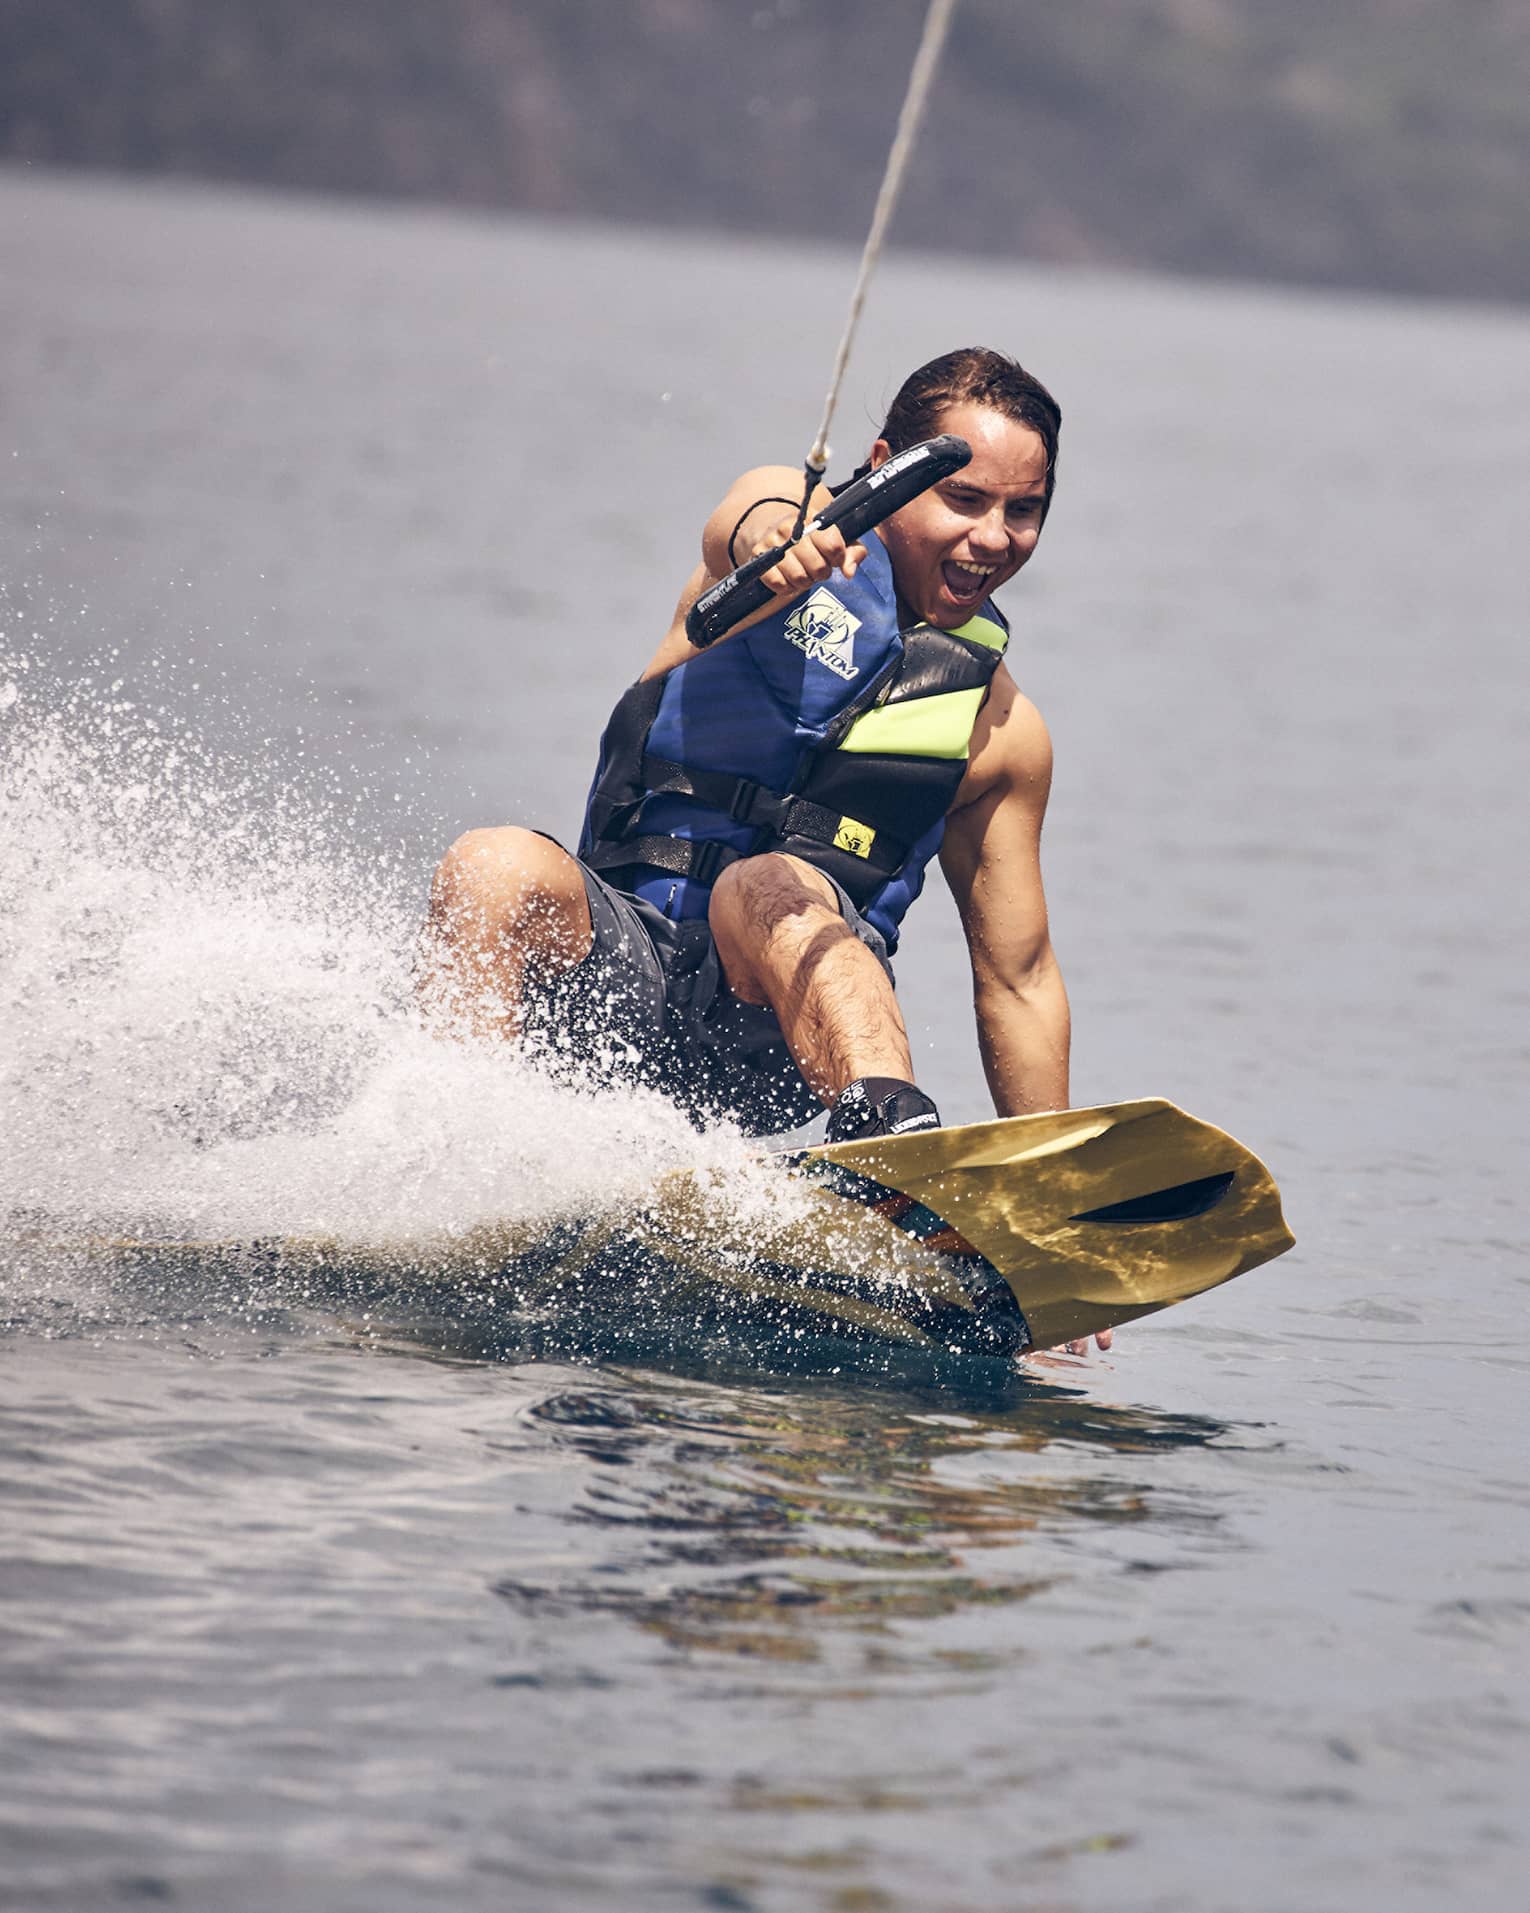 Young man wearing a blue and green life vest and blue swim trunks wakeboarding through the water